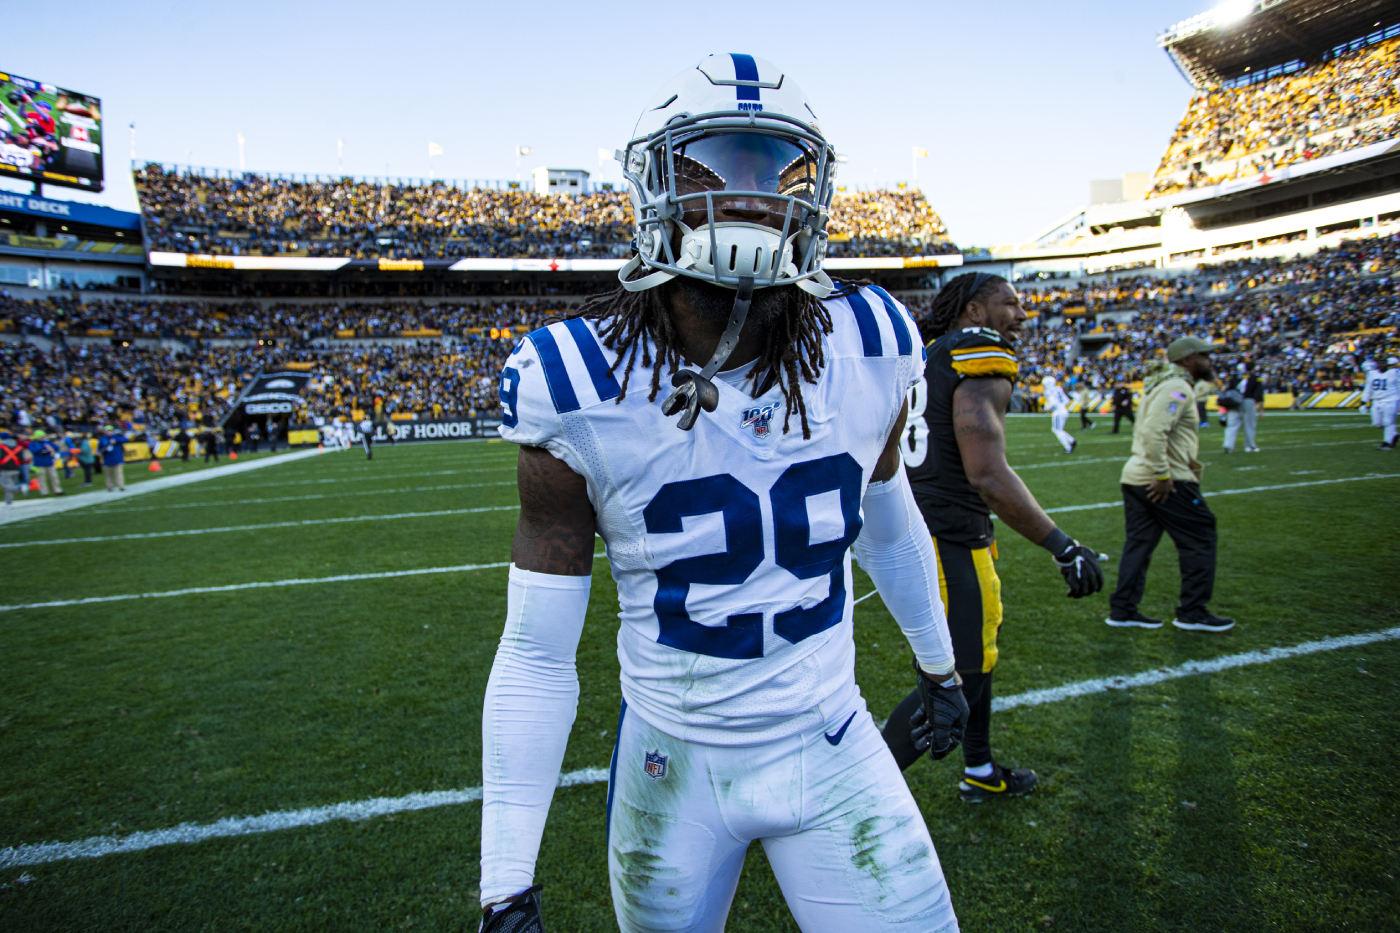 Malik Hooker has shown glimpses of unreal potential for the Colts. However, he has also had horrible luck so far in his NFL career.